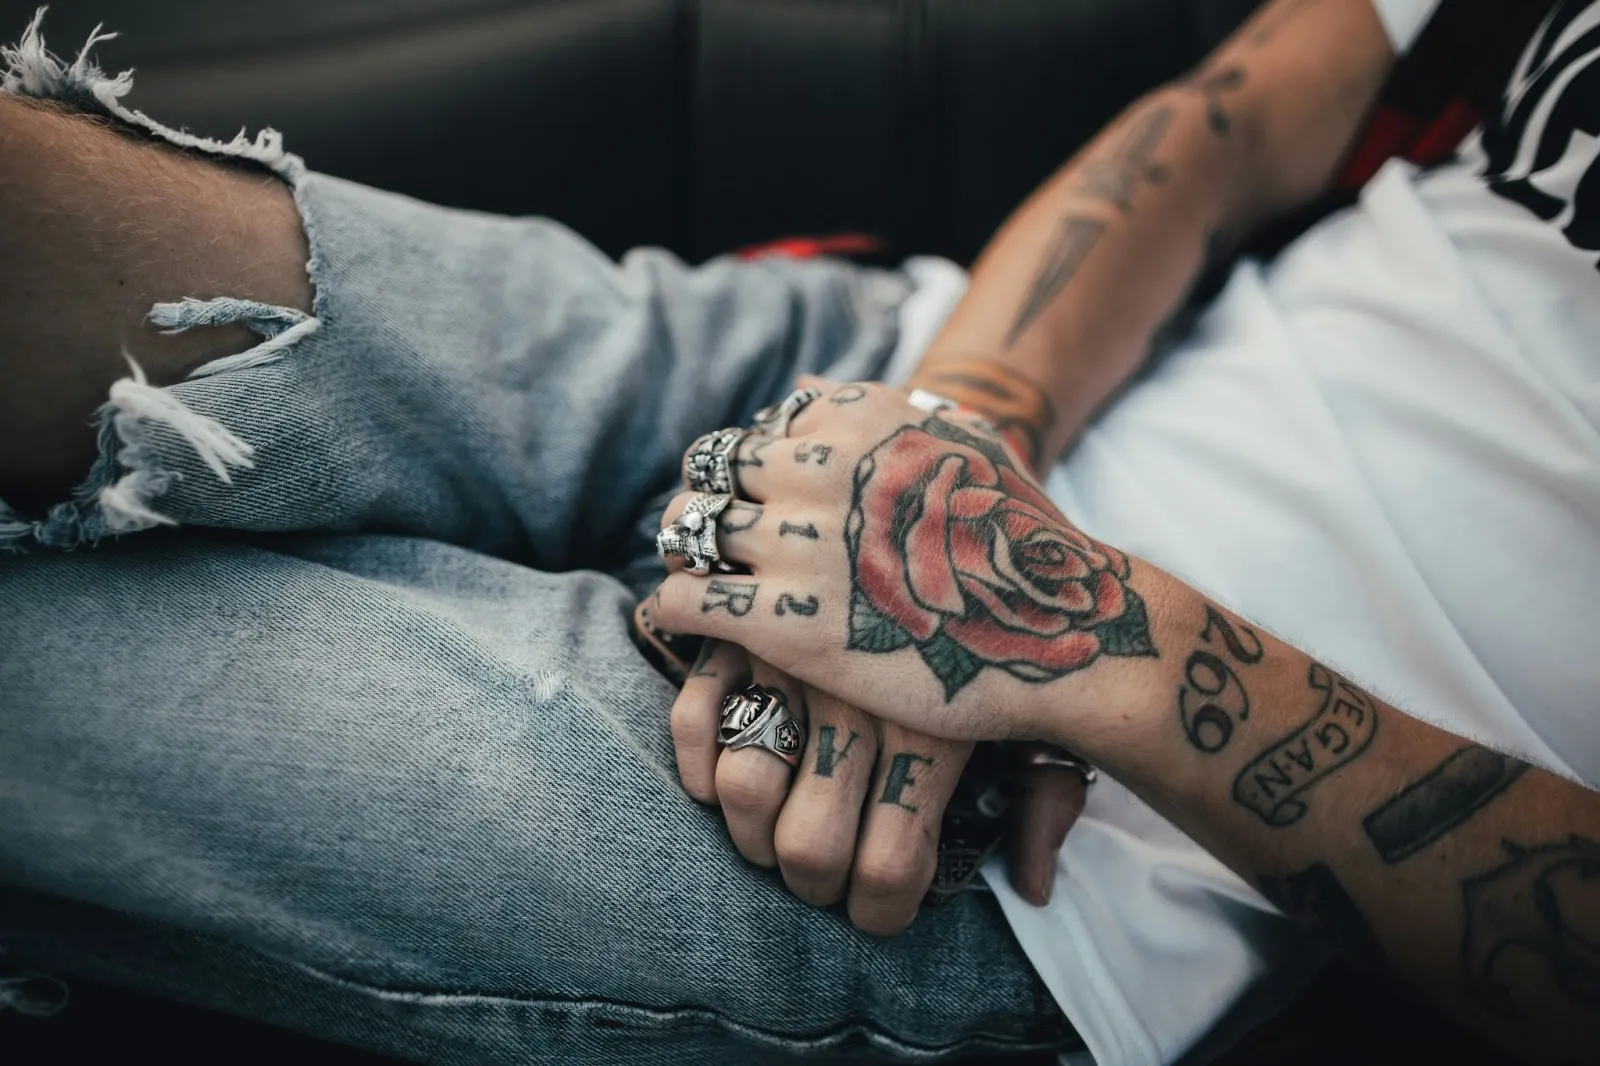 A person’s arms filled with tattoos of rose and other designs, with silvers rings worn on its fingers  